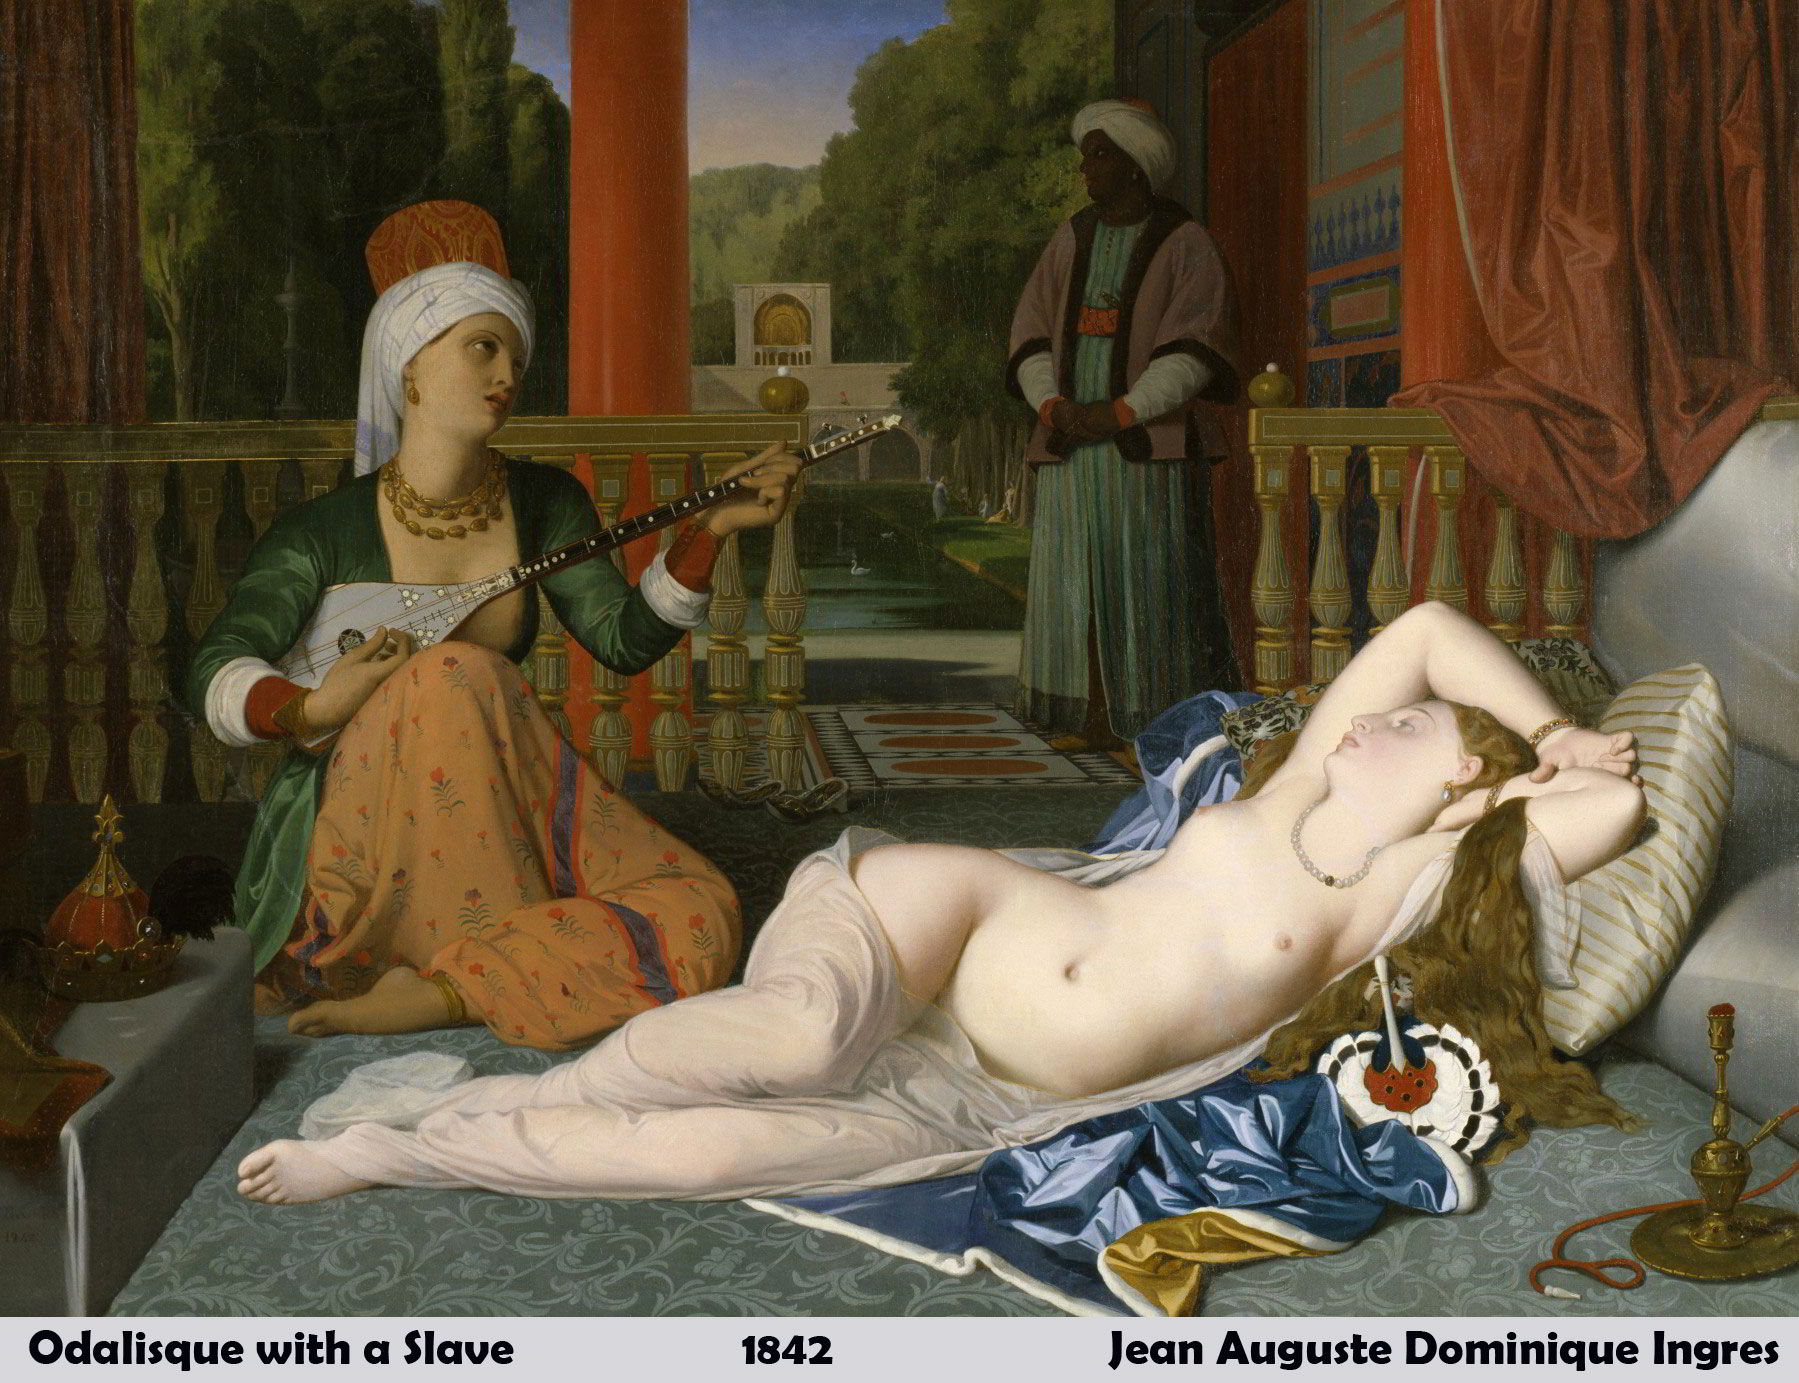 Odalisque with a Slave by Jean Auguste Dominique Ingres-History Painting